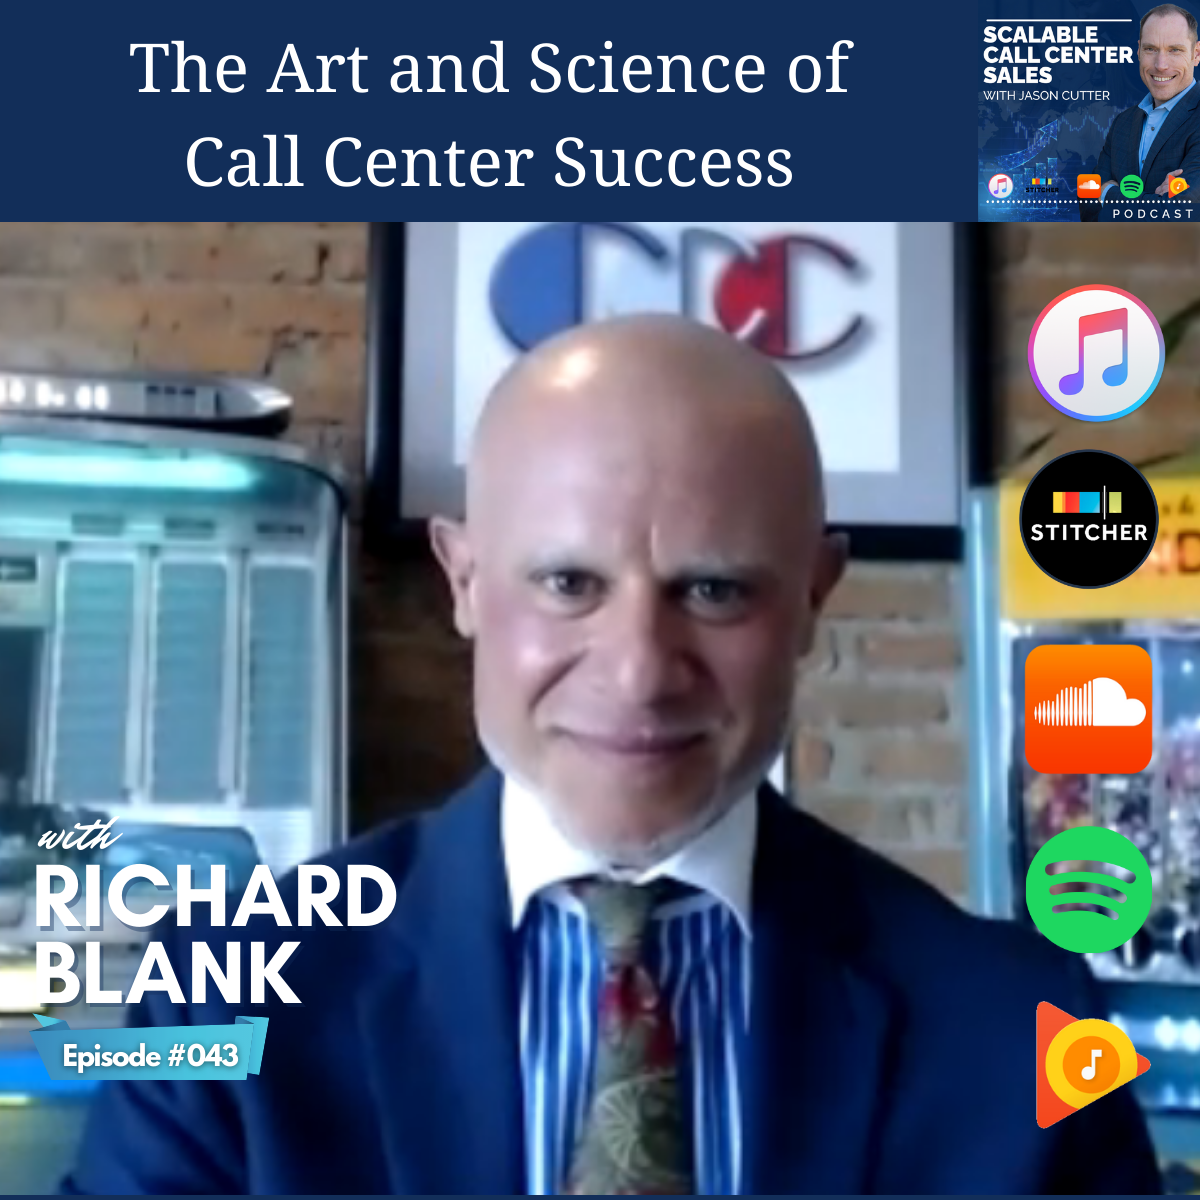 [043] The Art and Science of Call Center Success, with Richard Blank from Costa Rica's Call Center